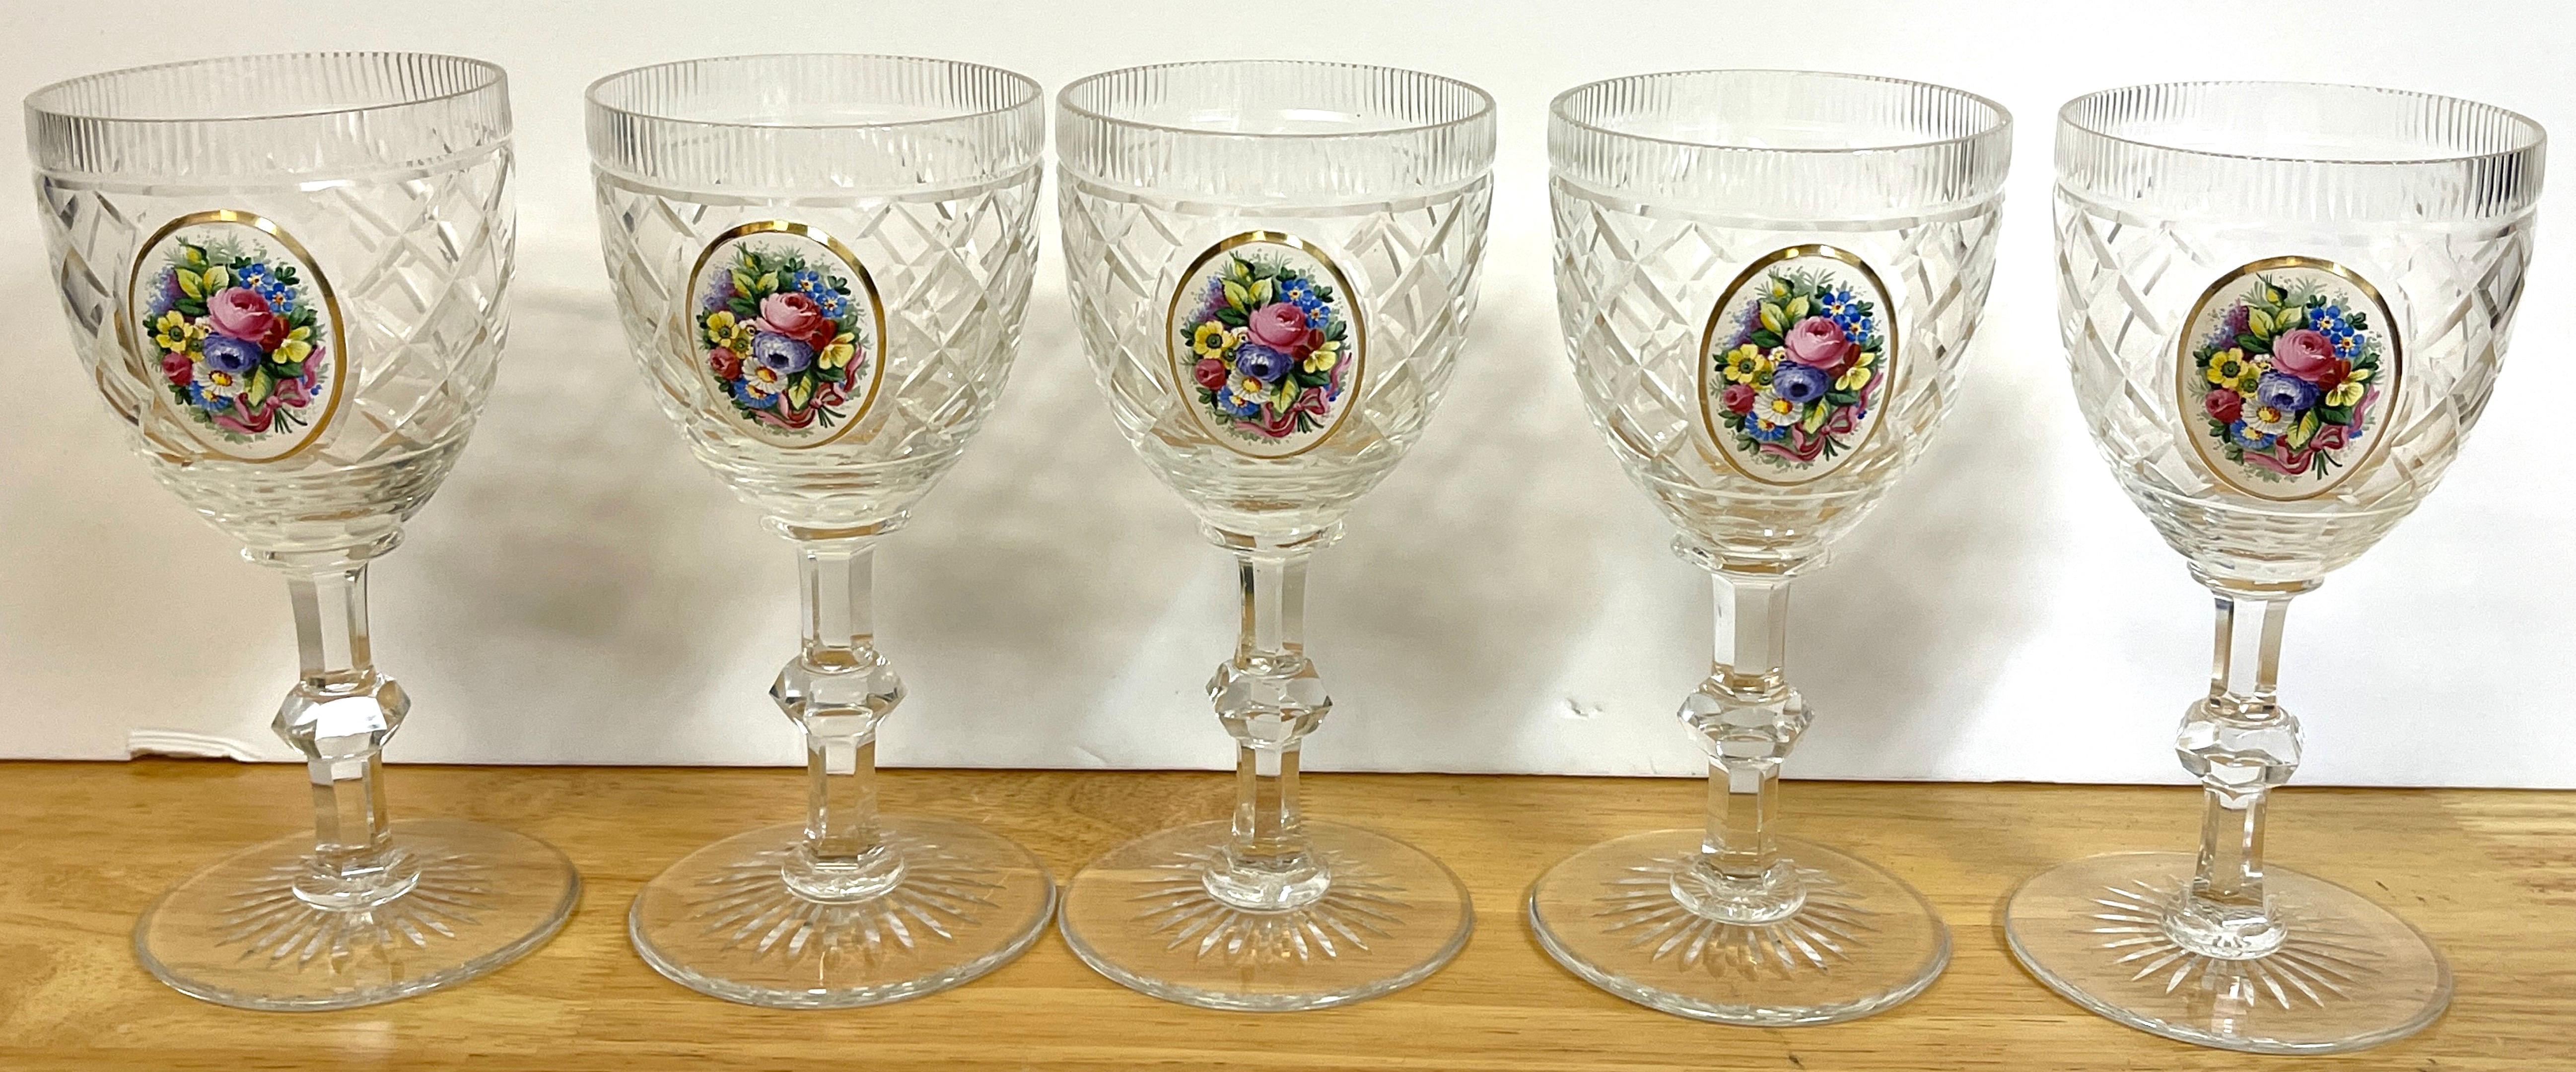 Crystal 12 Exquisite Moser Floral Enameled Cut to Clear Enamel Water/Wine Goblets For Sale